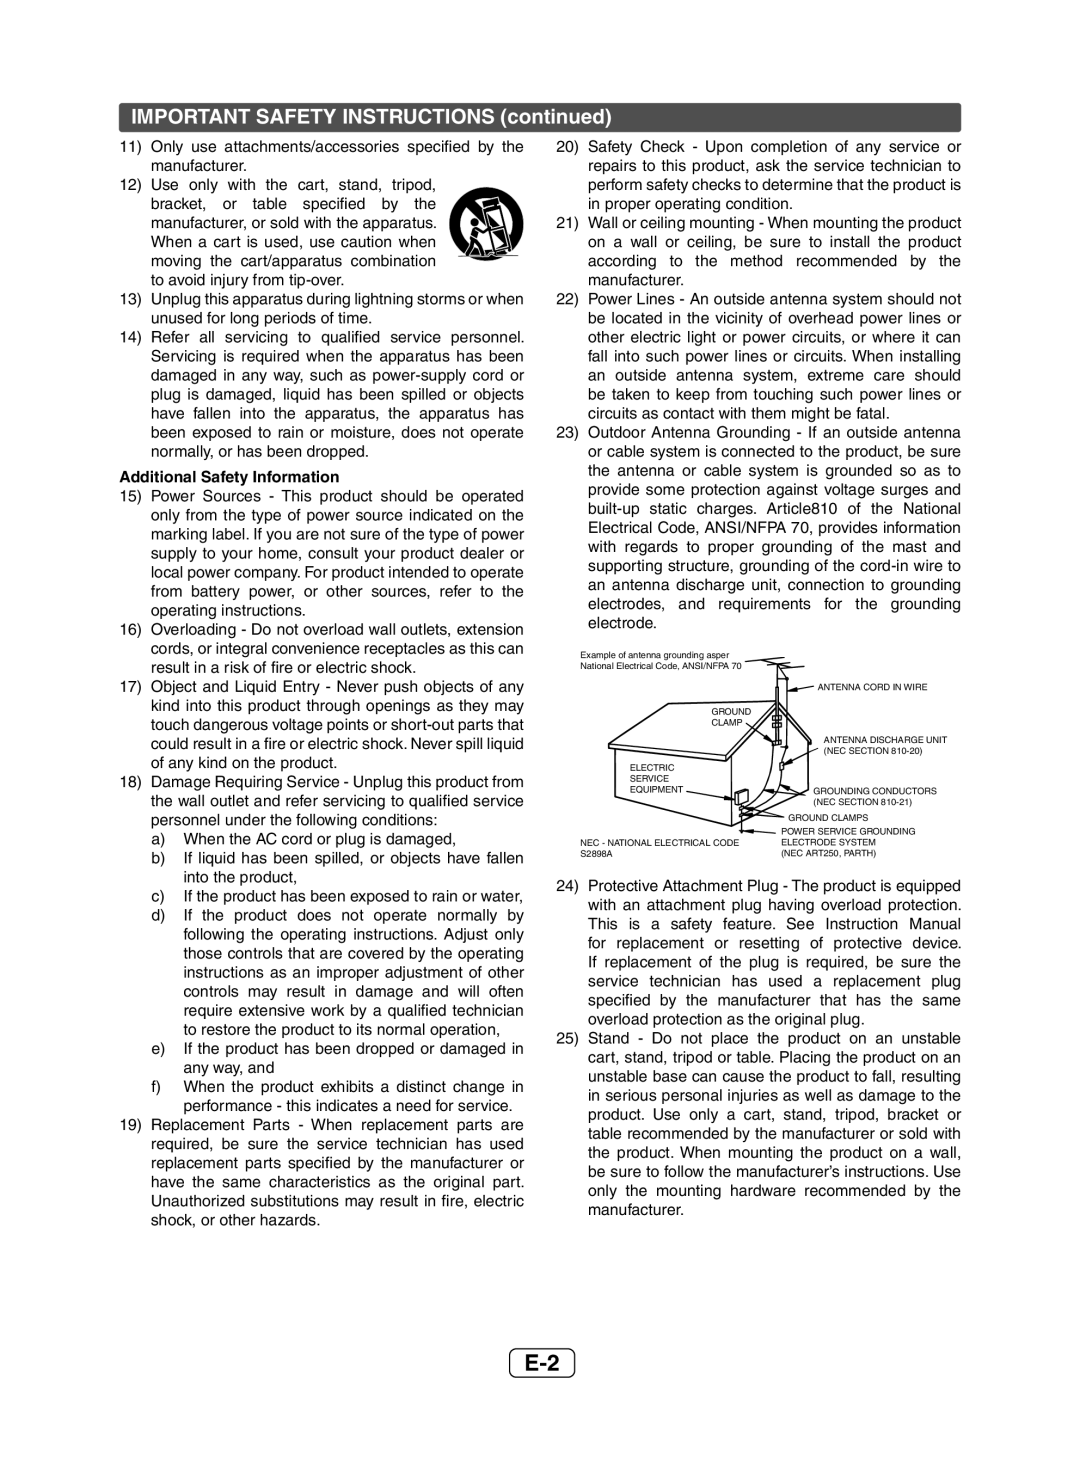 Sony XL-HF200P(BK) operation manual IMPORTANT SAFETY INSTRUCTIONS continued 